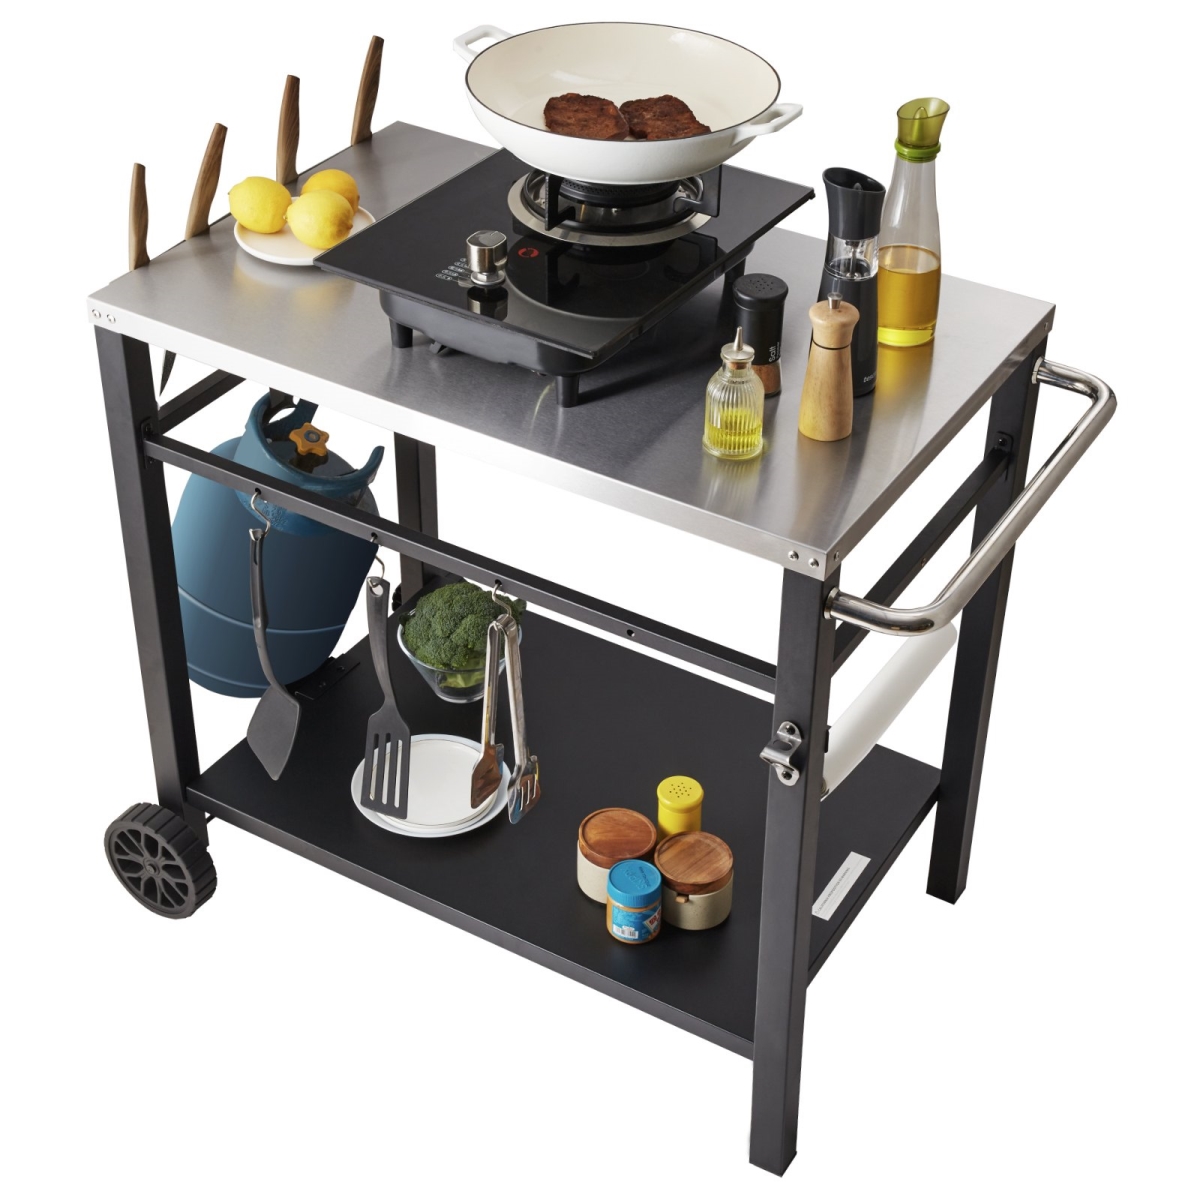 Picture of Vevor JSHWBCTC855512MJNV0 Outdoor Grill Dining Cart with Double-Shelf